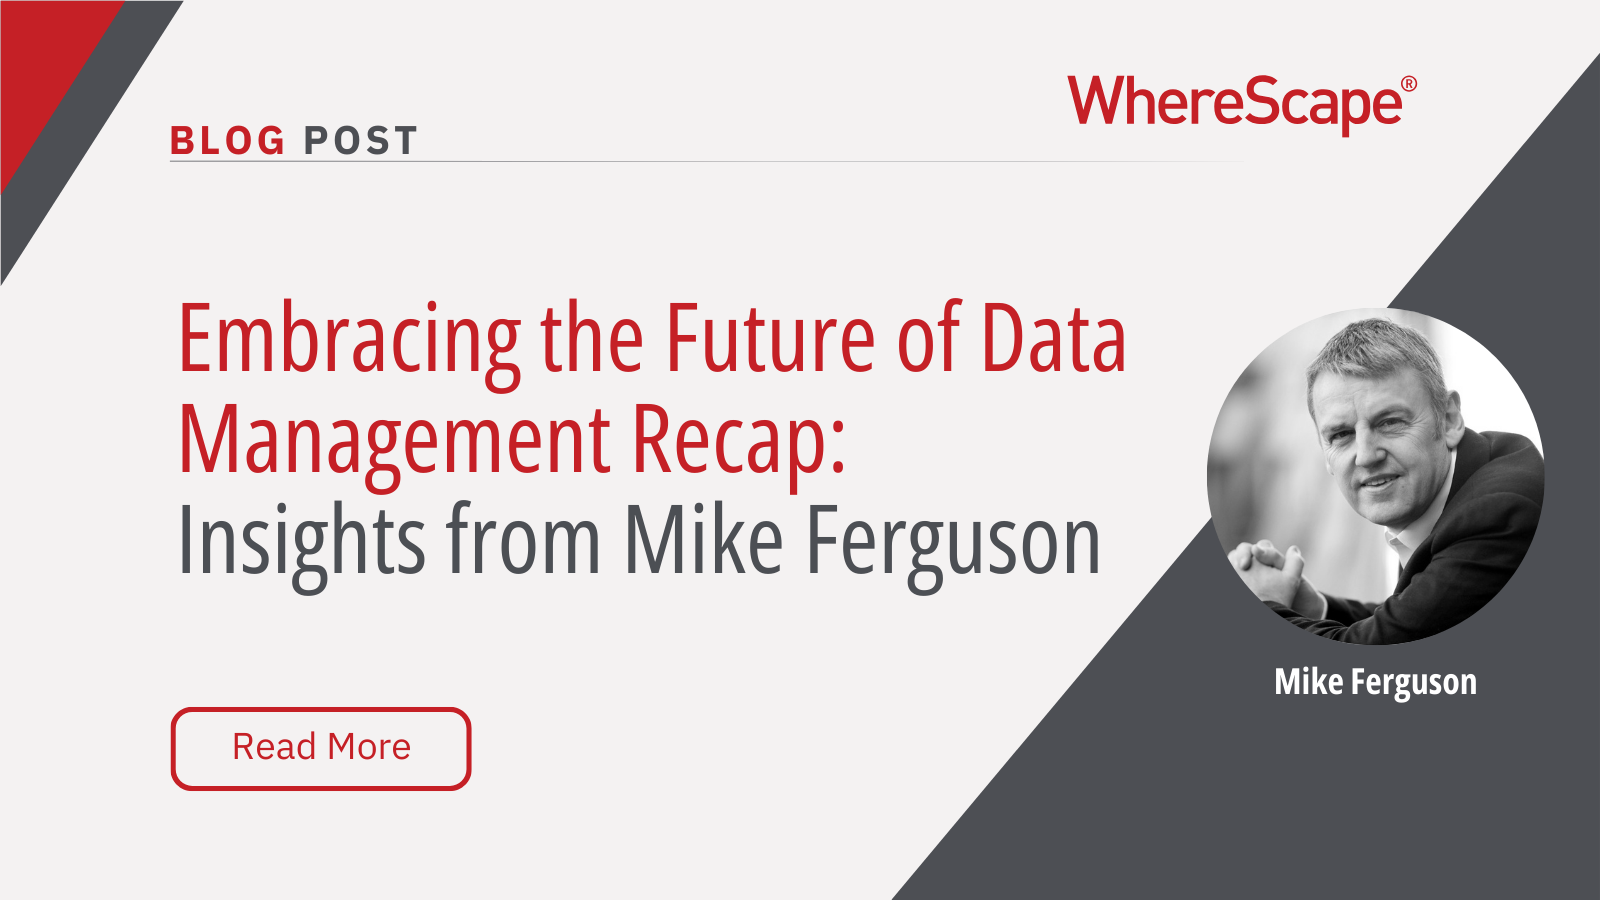 Embracing the Future of Data Management Recap: Insights from Mike Ferguson